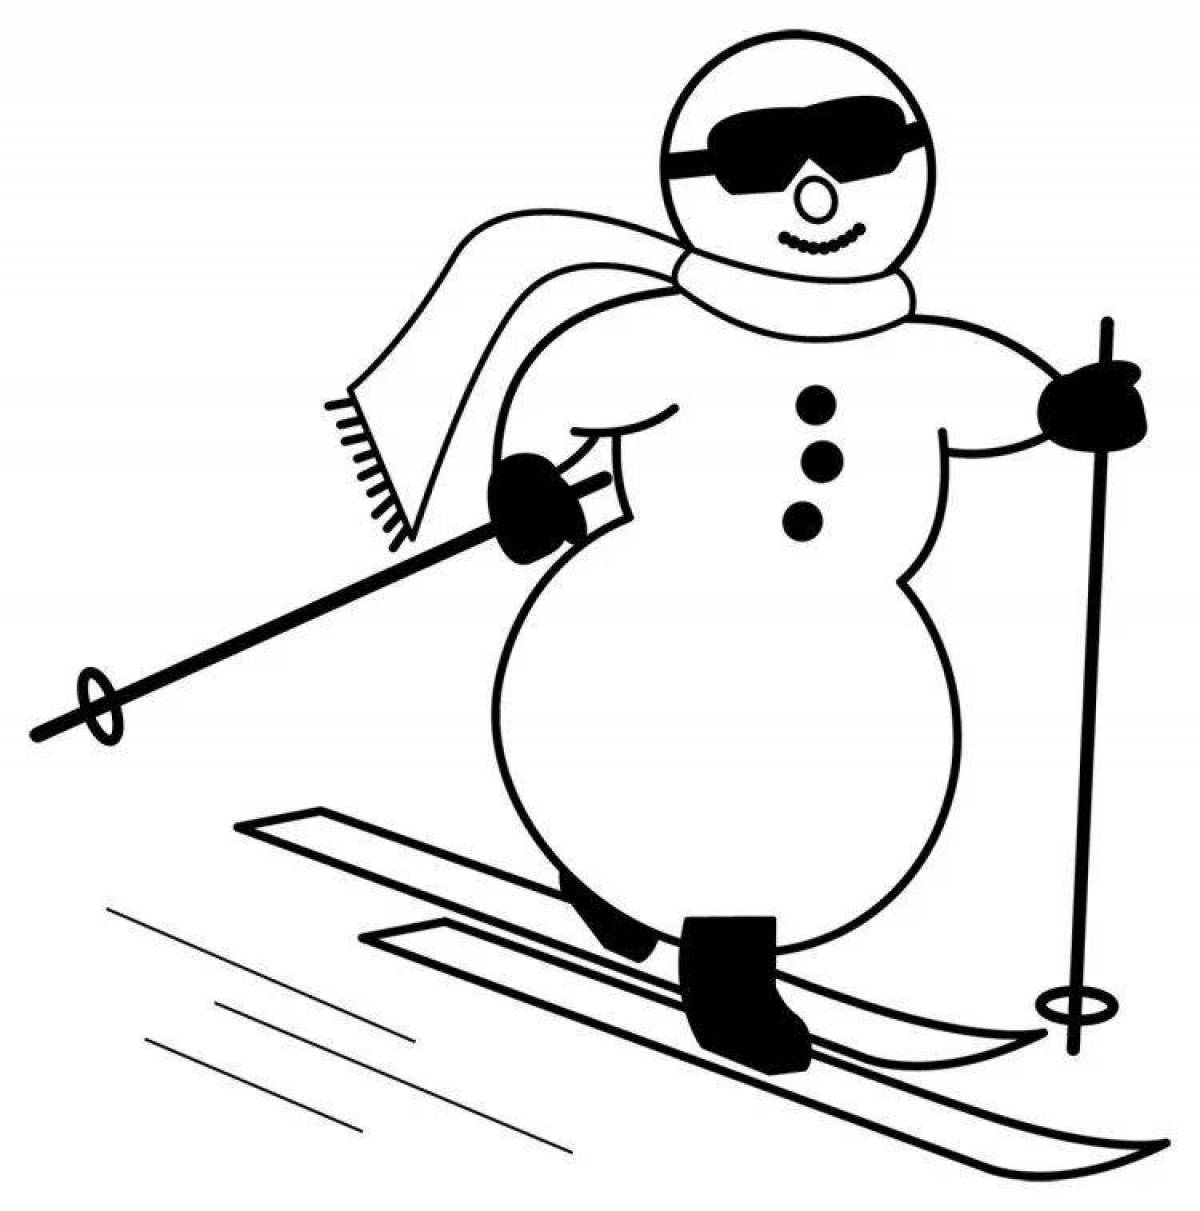 Snowman skiing coloring page